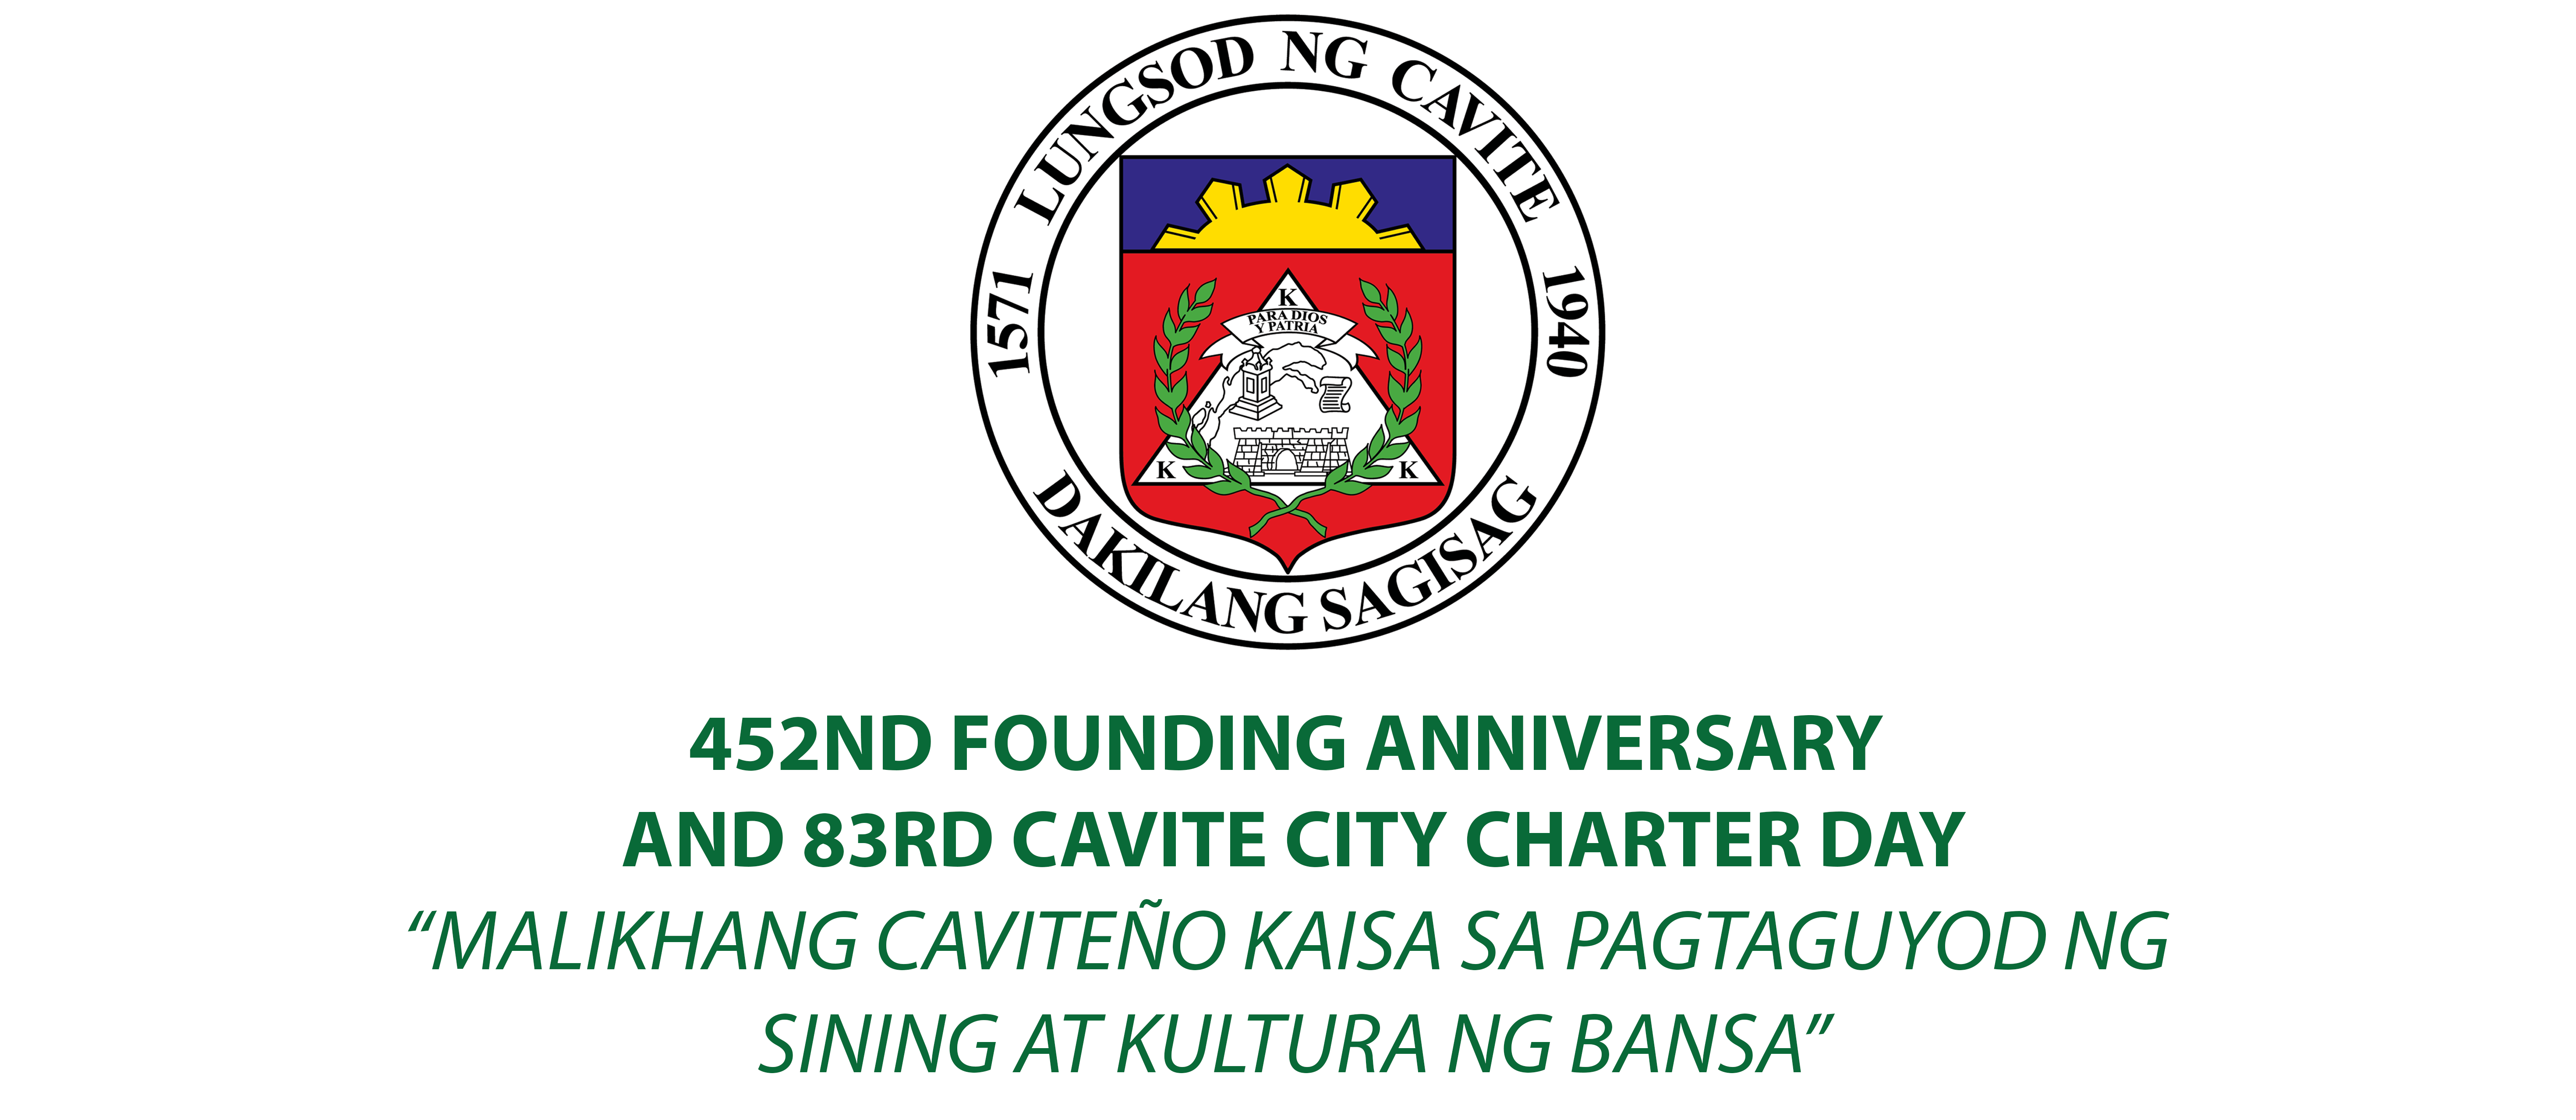 452ND FOUNDING ANNIVERSARY AND 83RD CAVITE CITY CHARTER DAY